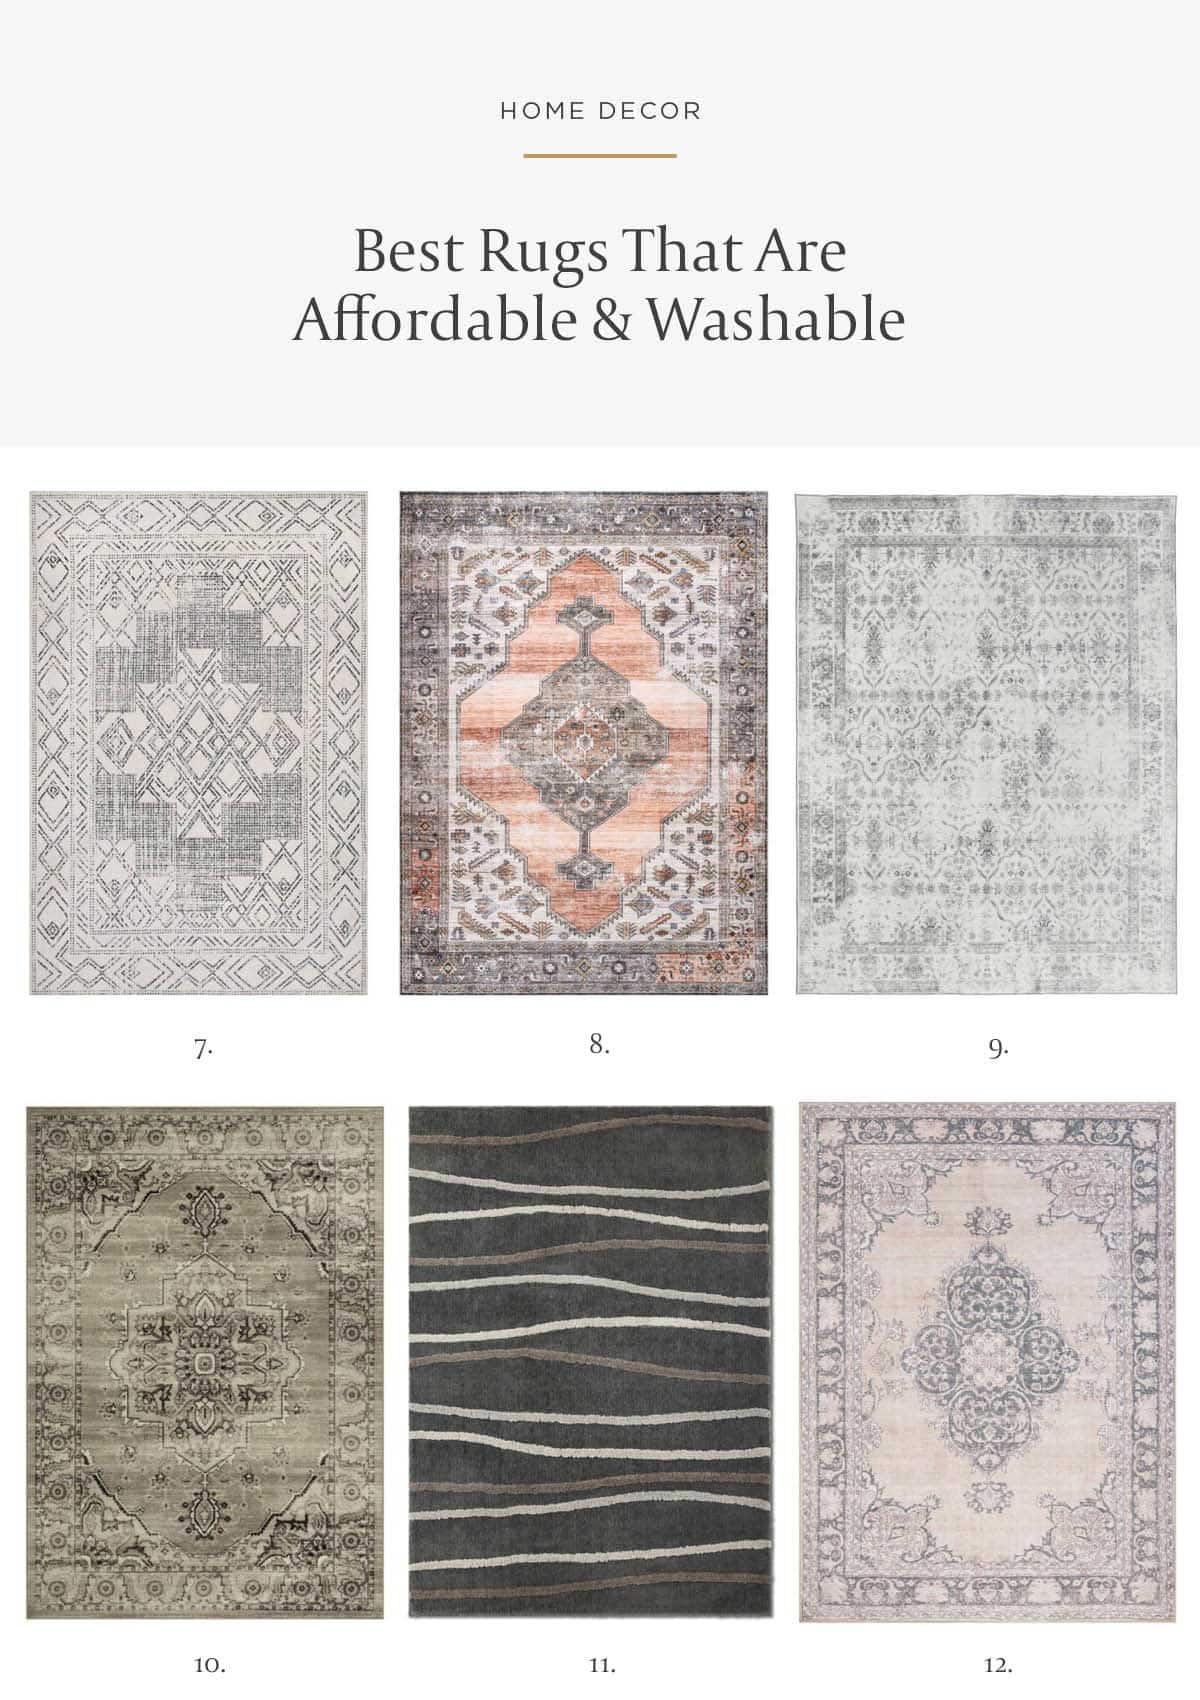 Best Affordable Rugs That Are Washable